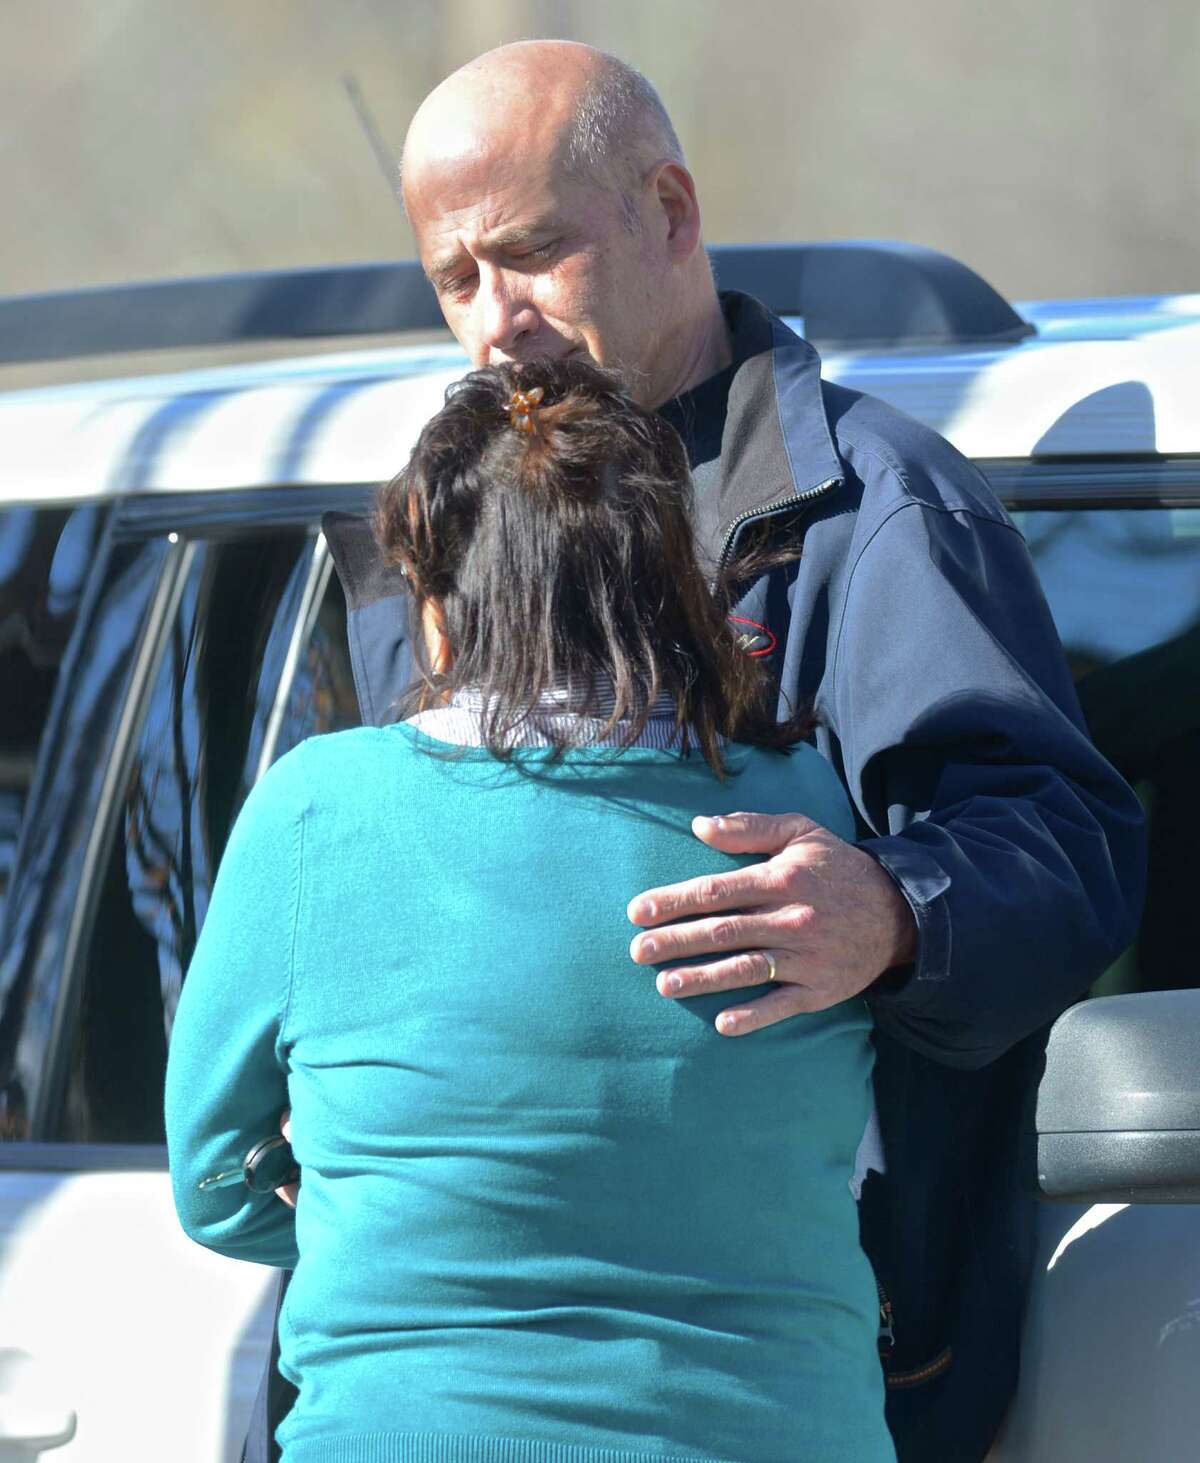 Eric Horsa, of Ridgefield, comforts his wife, Portia, as authorities on Friday search the Titicus Reservoir in North Salem, N.Y., for a small plane that went missing during its approach to Danbury Airport. Horsa said he believes his father, Val Horsa, and his stepmother, Taew Robinson, were on the small plane.